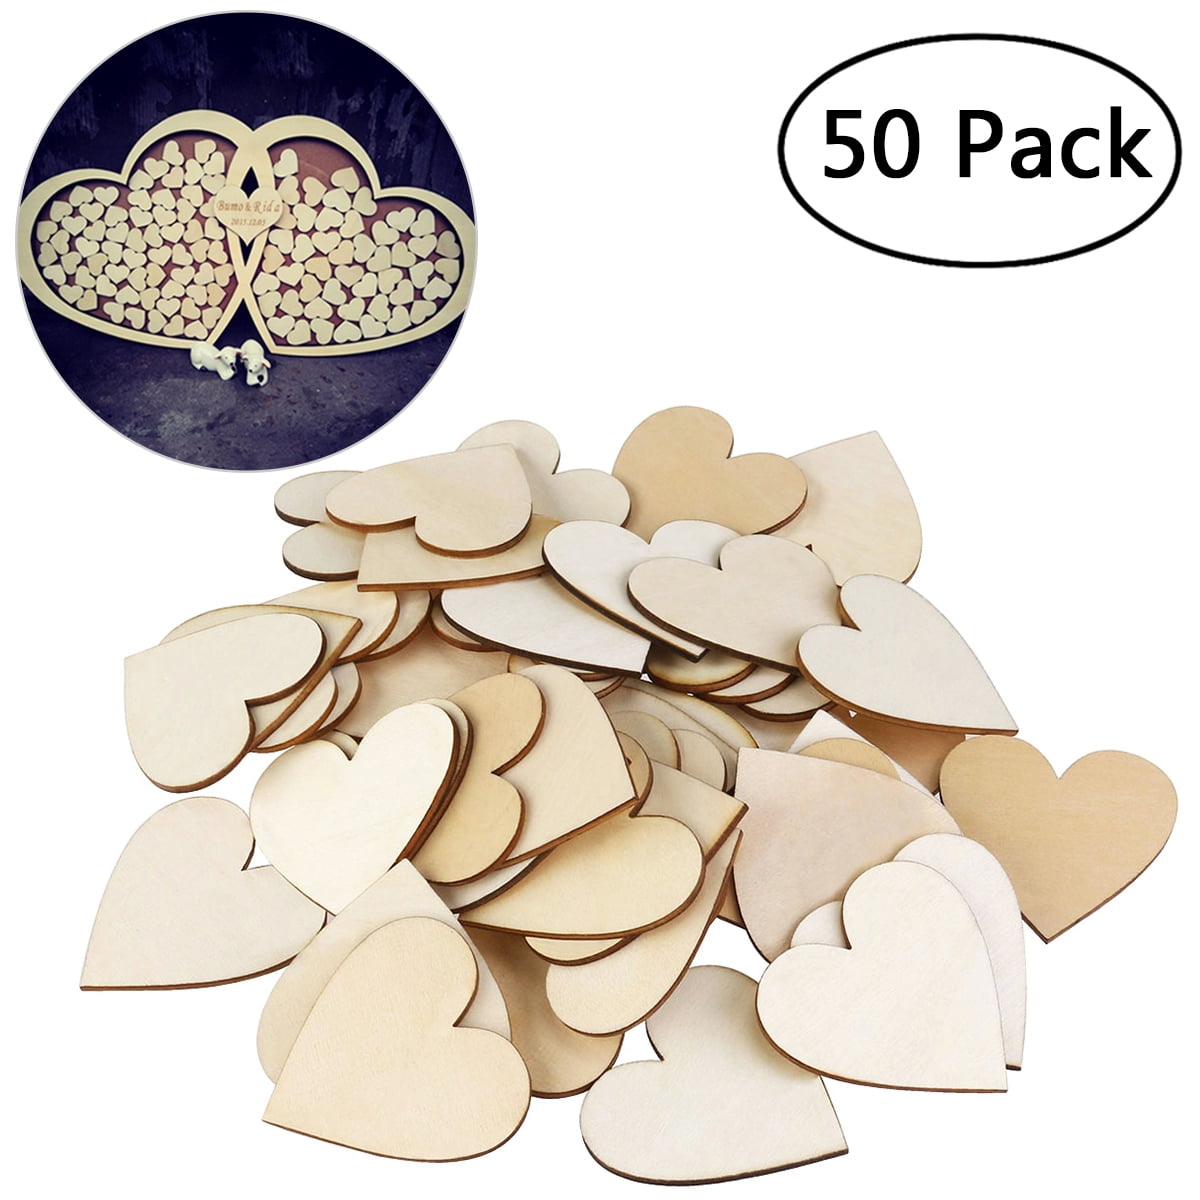 Hearts Wood Wooden Crafts Slices Discs Mini Small Log Guest Book Craft Heart Blank DIY Hole Chips Embellishments